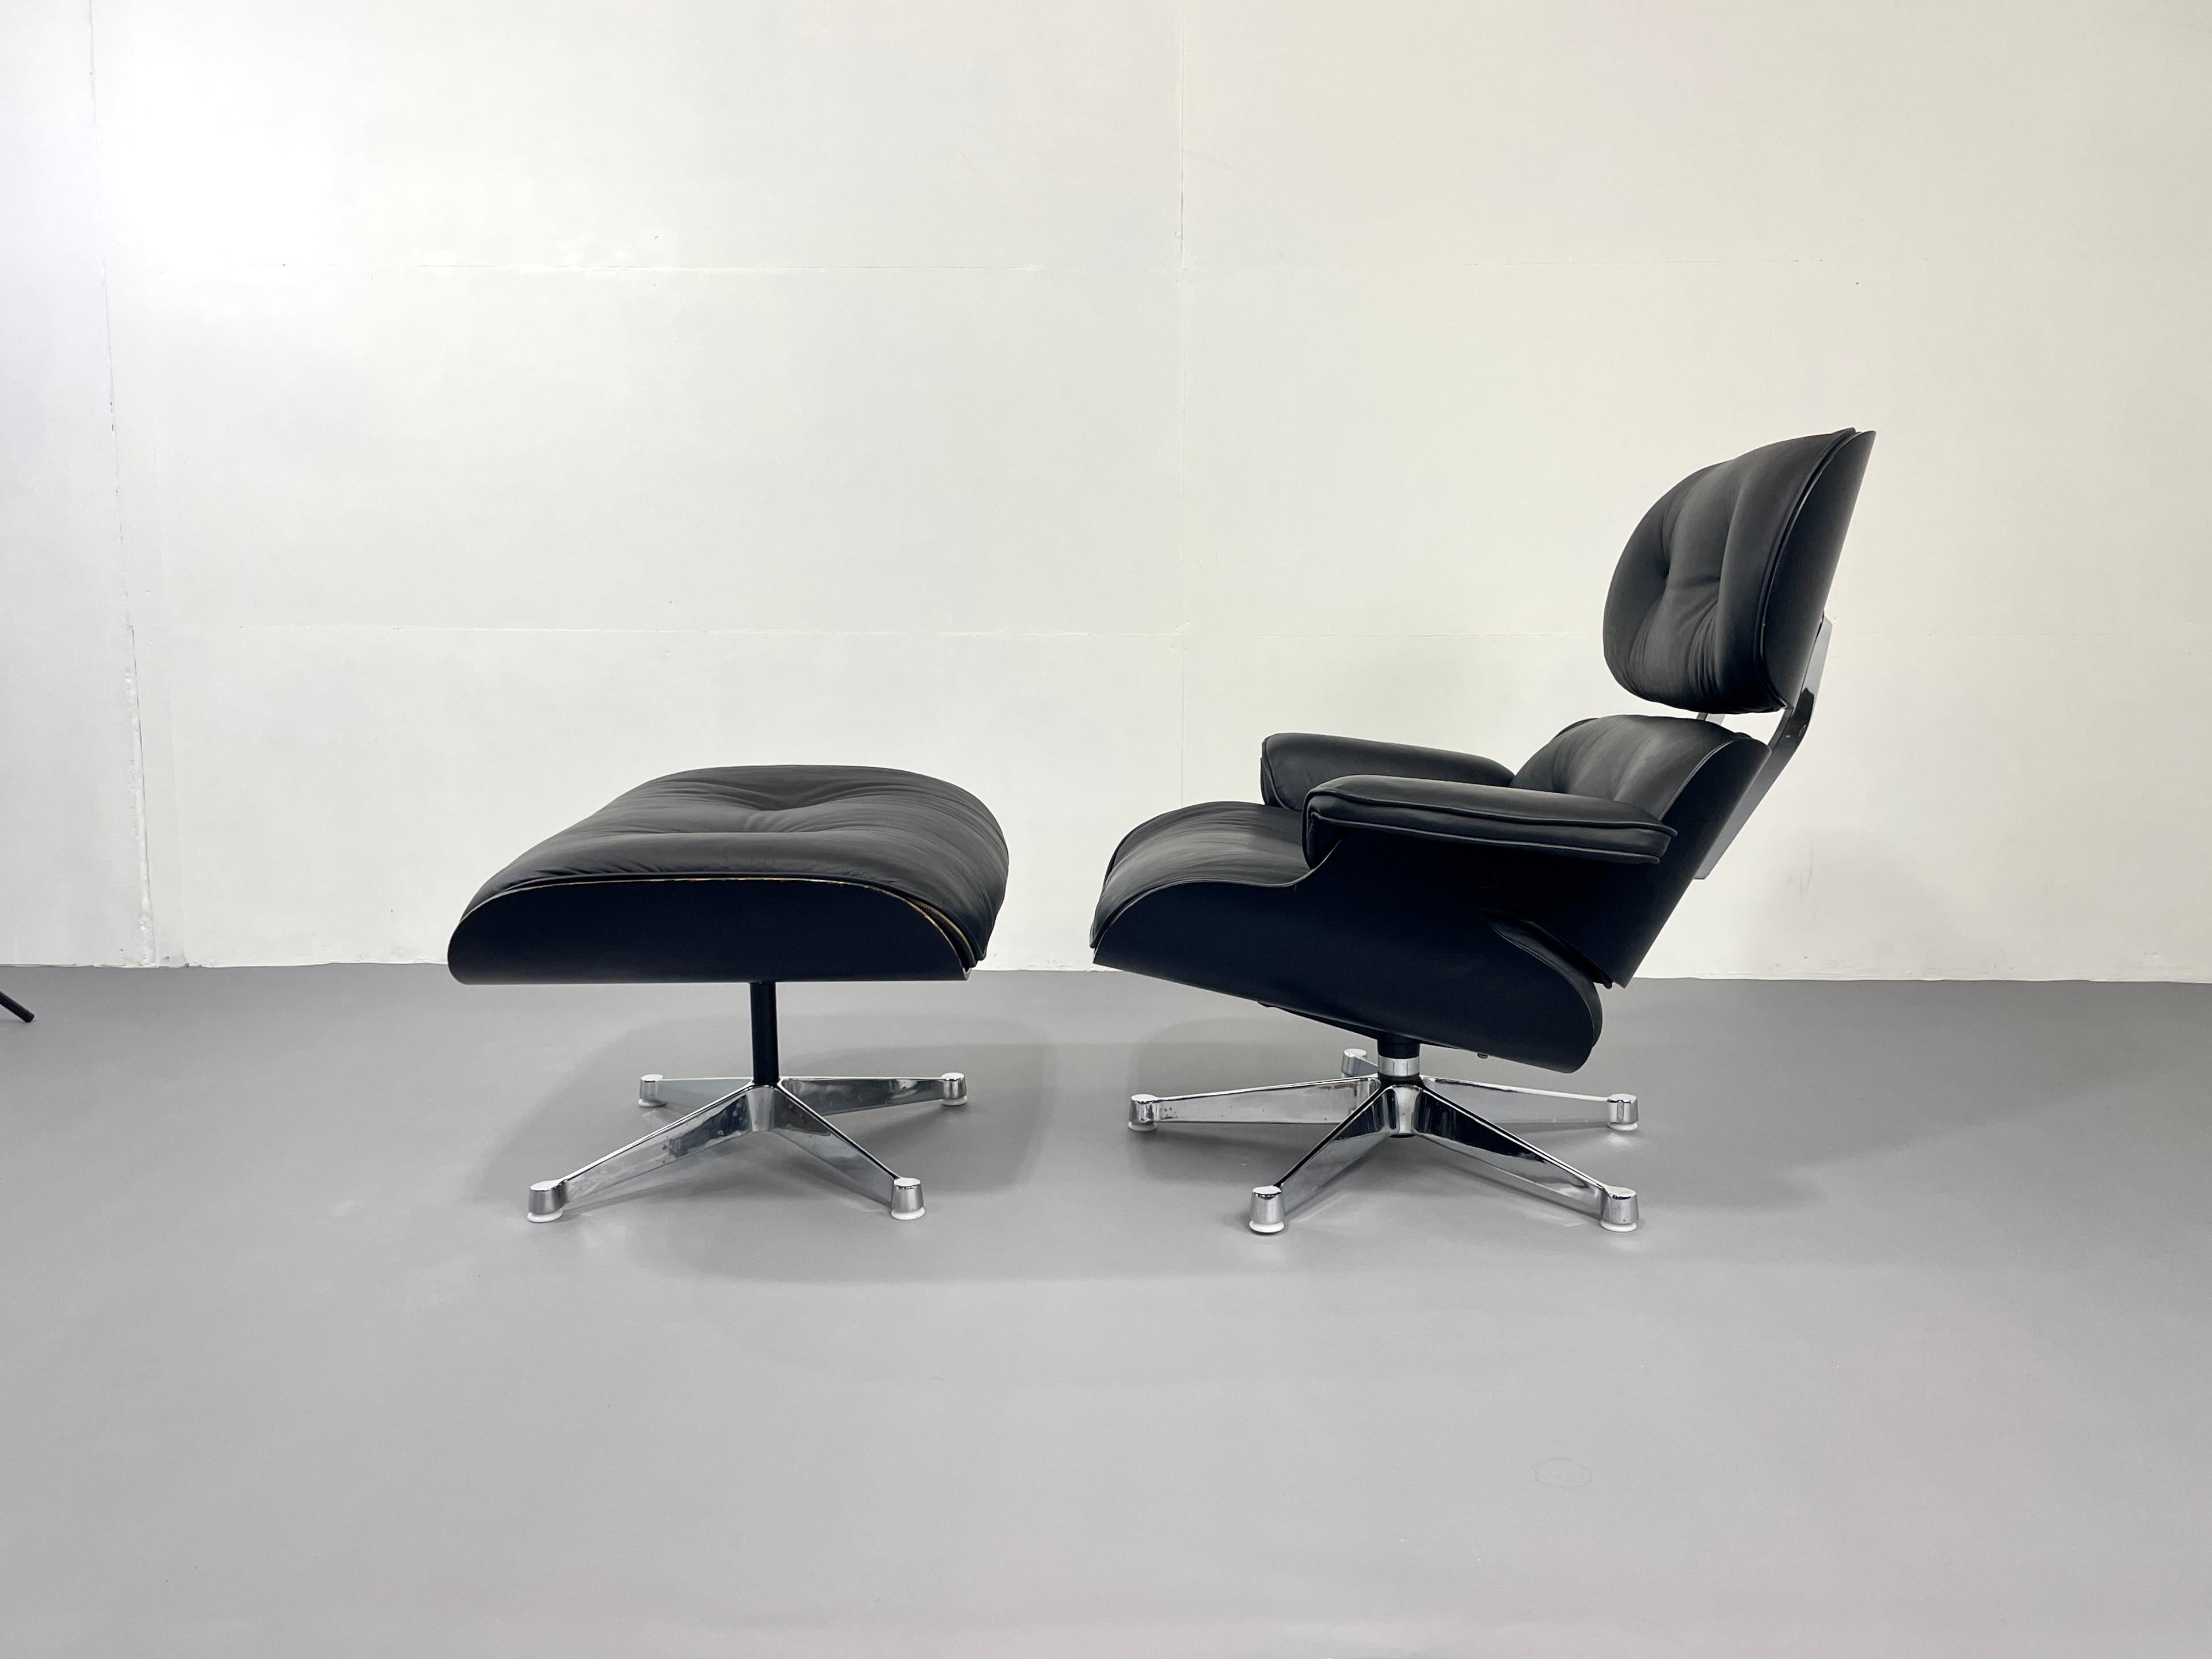 Black vintage Herman Miller Lounge Chair with Ottoman, designed by Eames  For Sale 4